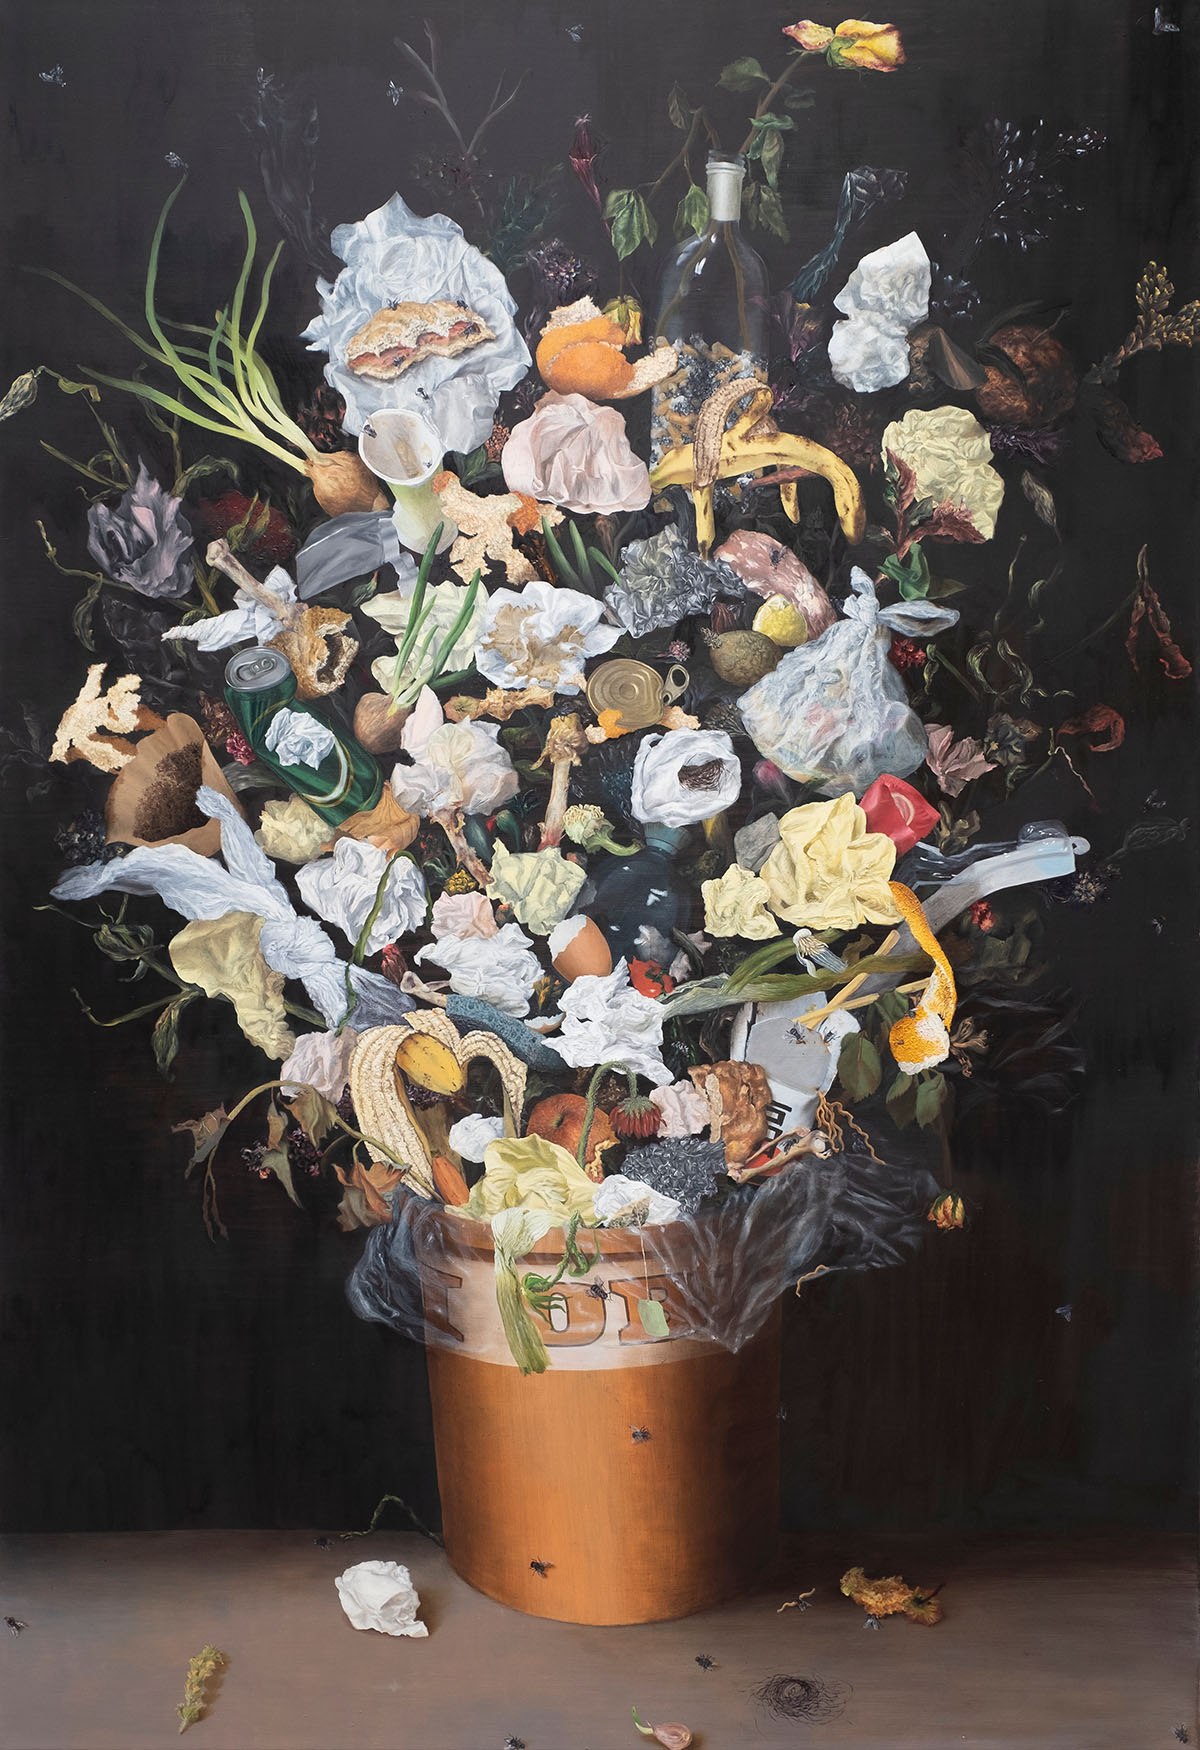 „The Great Bouquet“ 130 x 90 cm, oil on Canvas, 2018